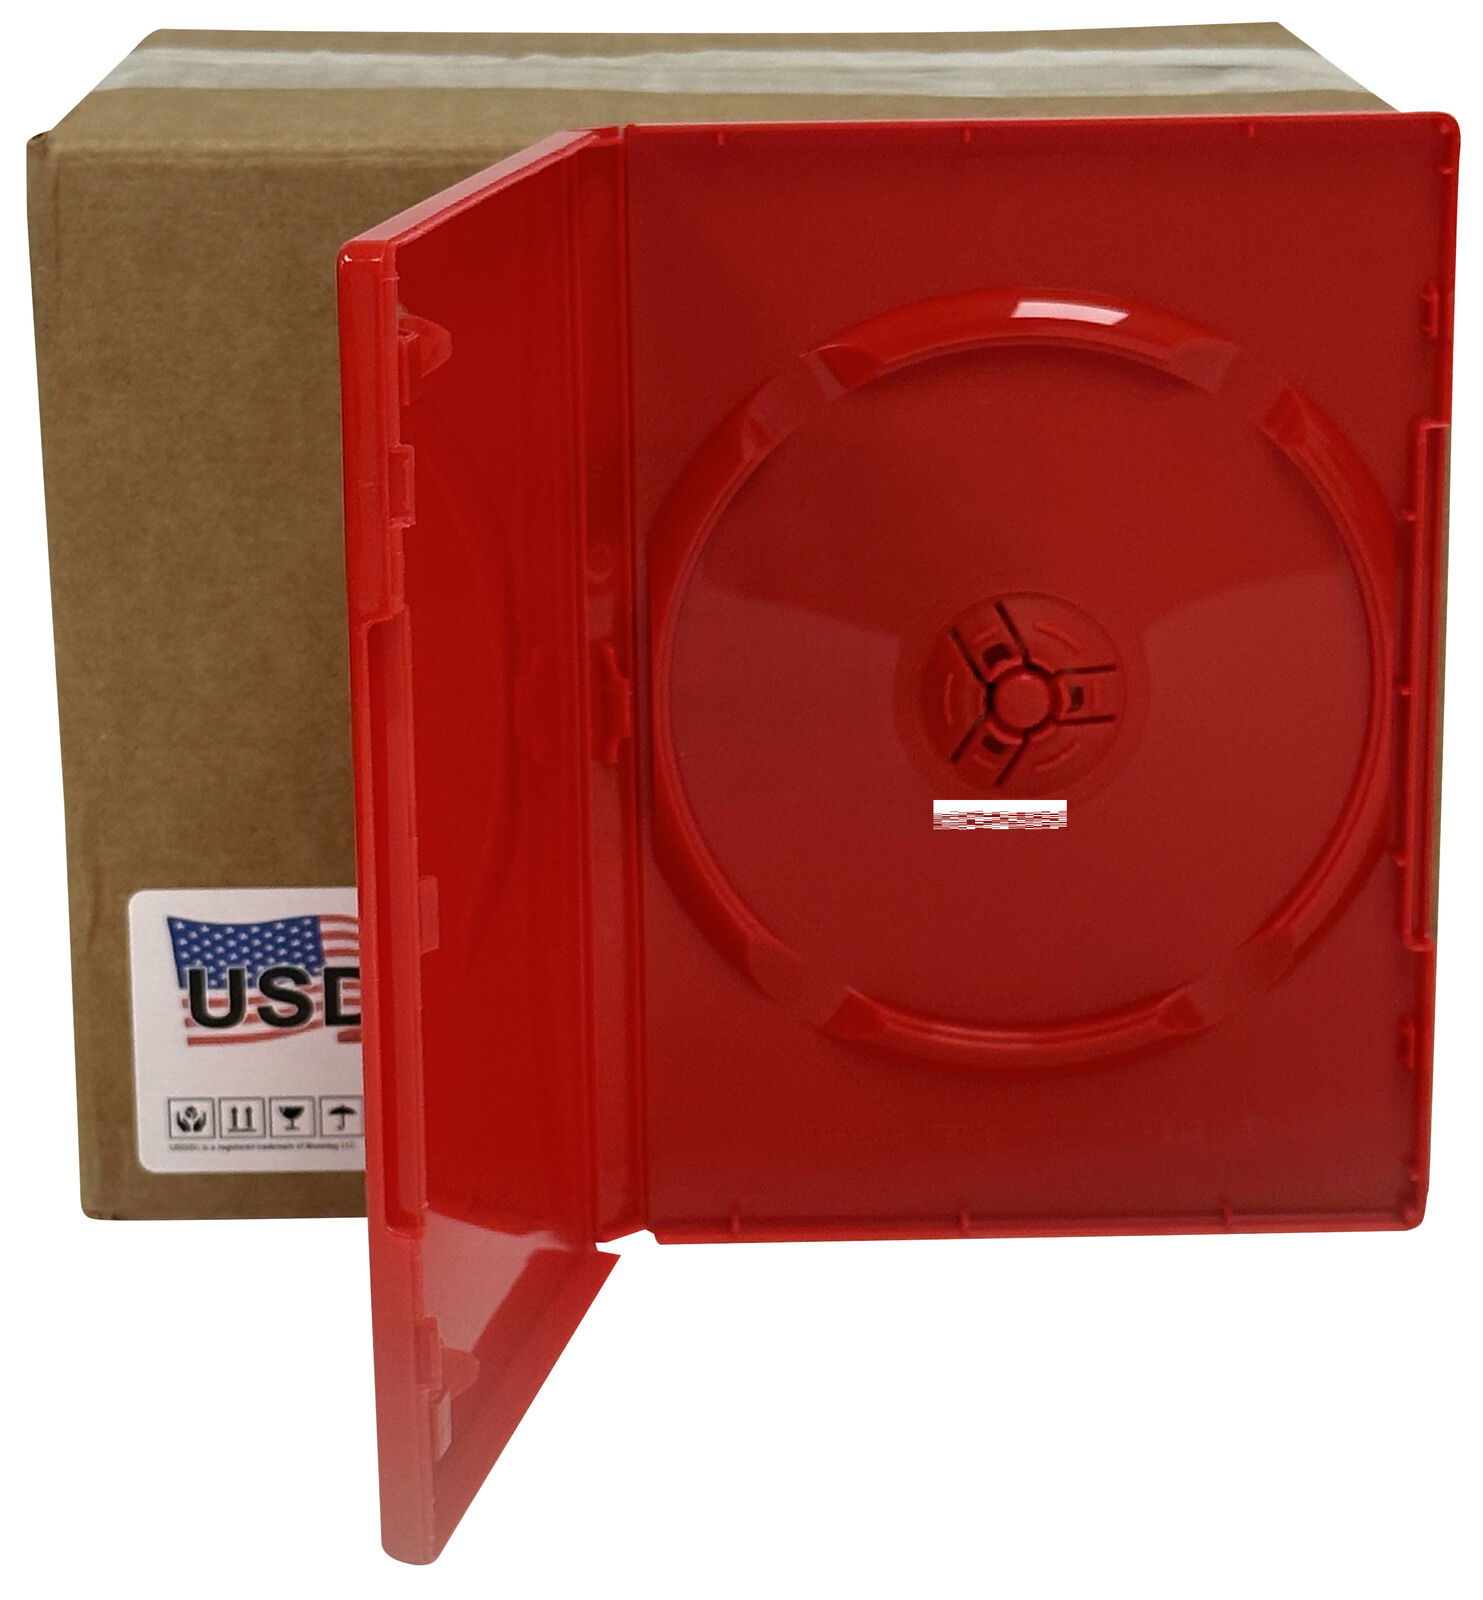 USDISC DVD Cases Standard 14mm Premium, Single 1 Disc (Glossy Red) Lot